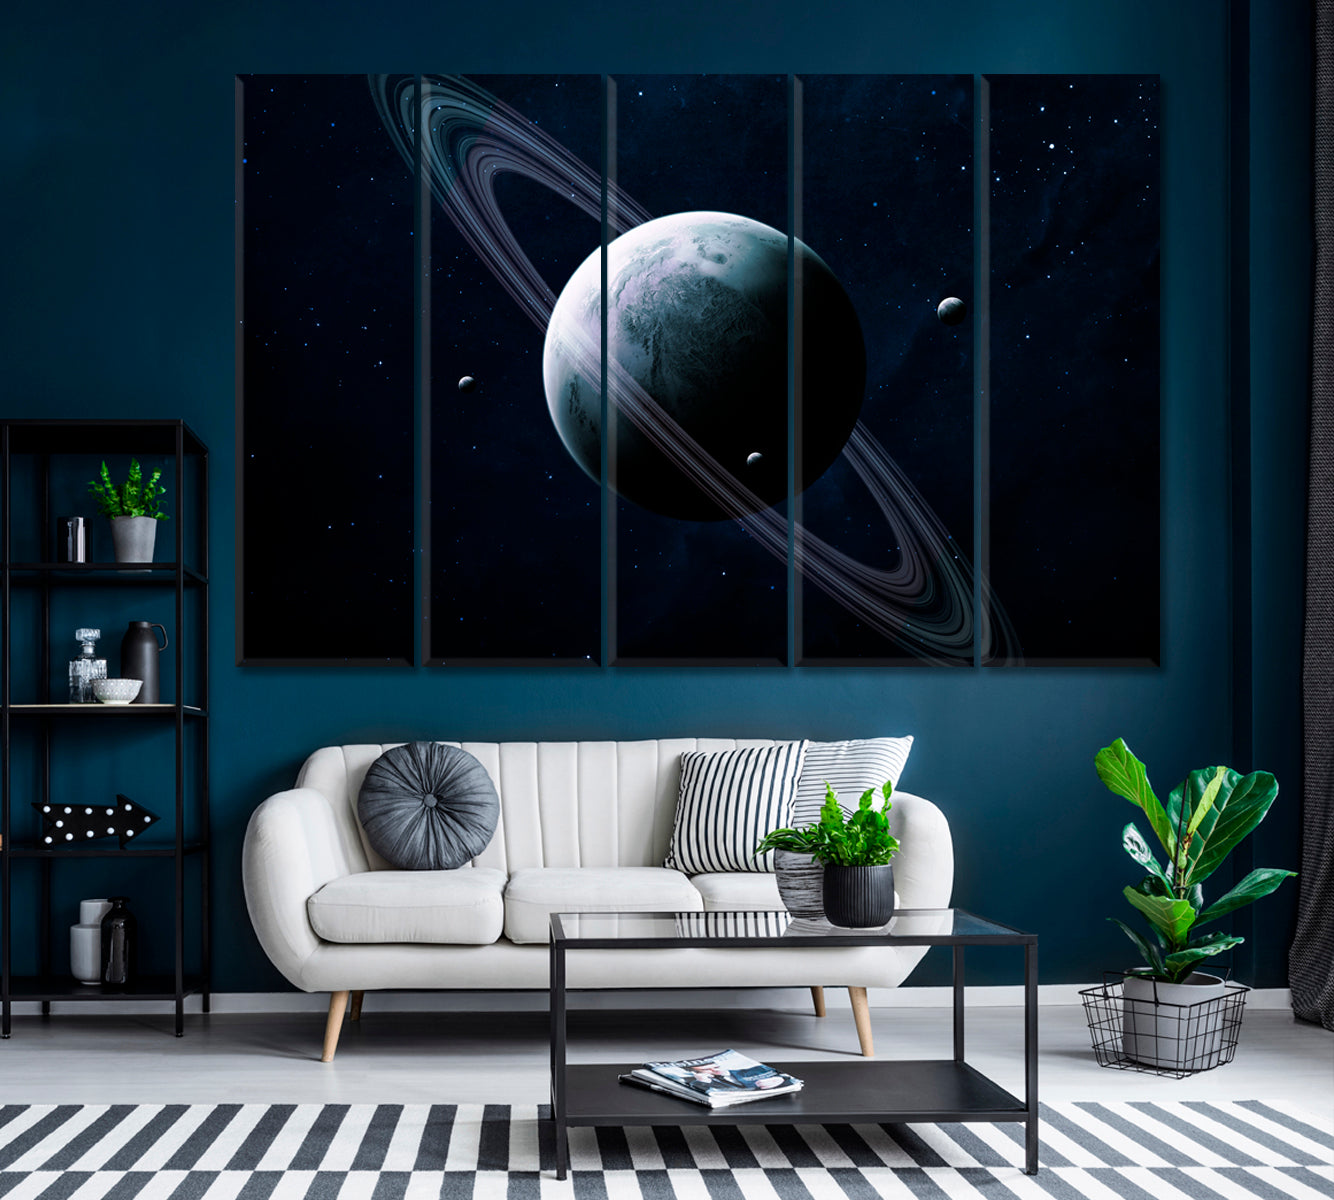 Planets in Space Canvas Print ArtLexy 5 Panels 36"x24" inches 